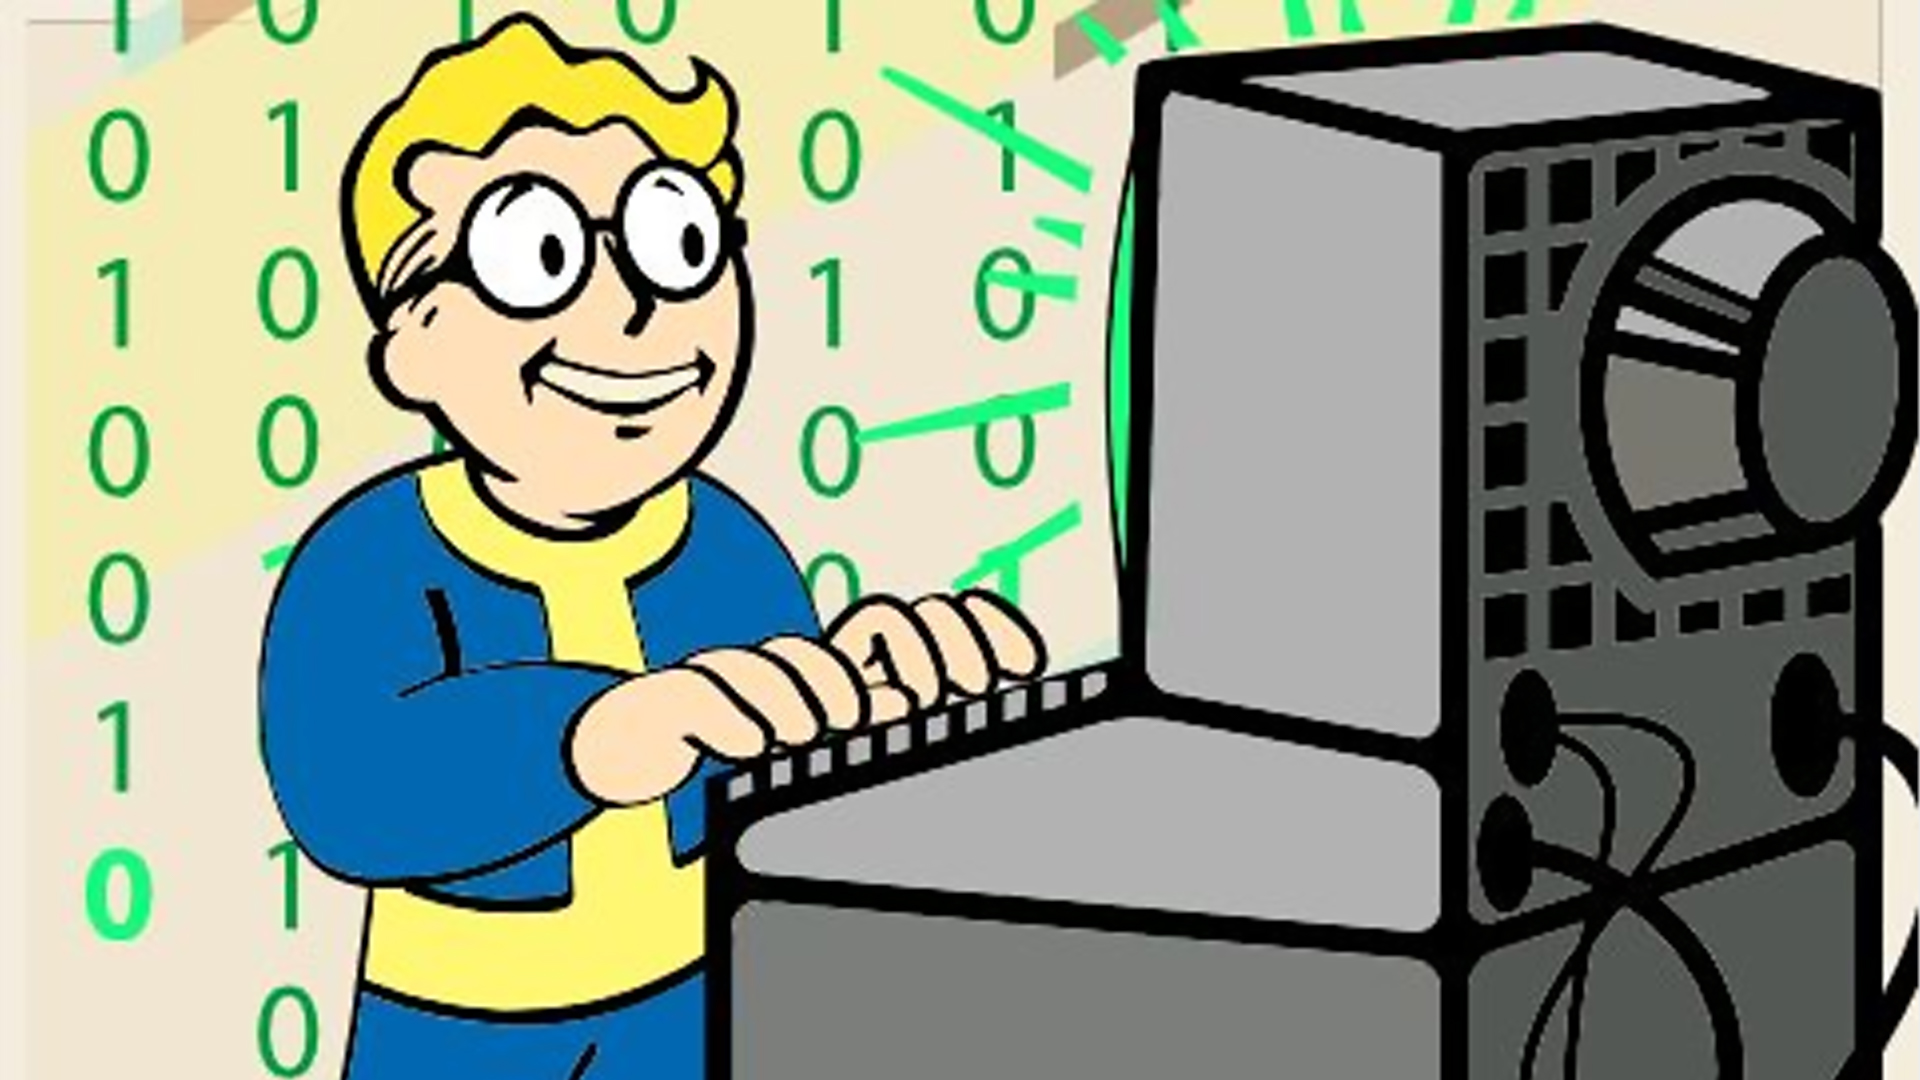 Bethesda Has Plans For Fallout 5, But Don't Expect To Hear About It Anytime Soon thumbnail